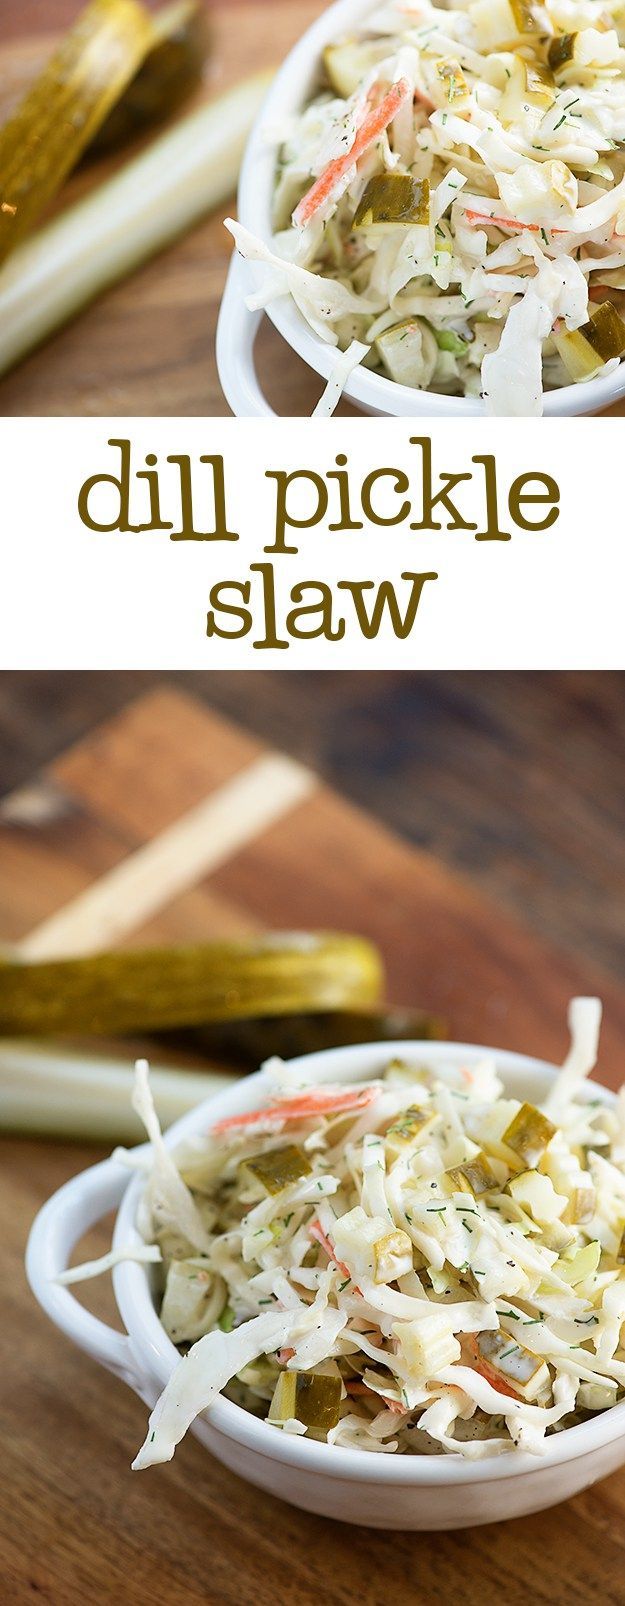 Dill pickle slaw – the perfect easy summer side dish! If you love dill pickles, you’ll love this recipe!